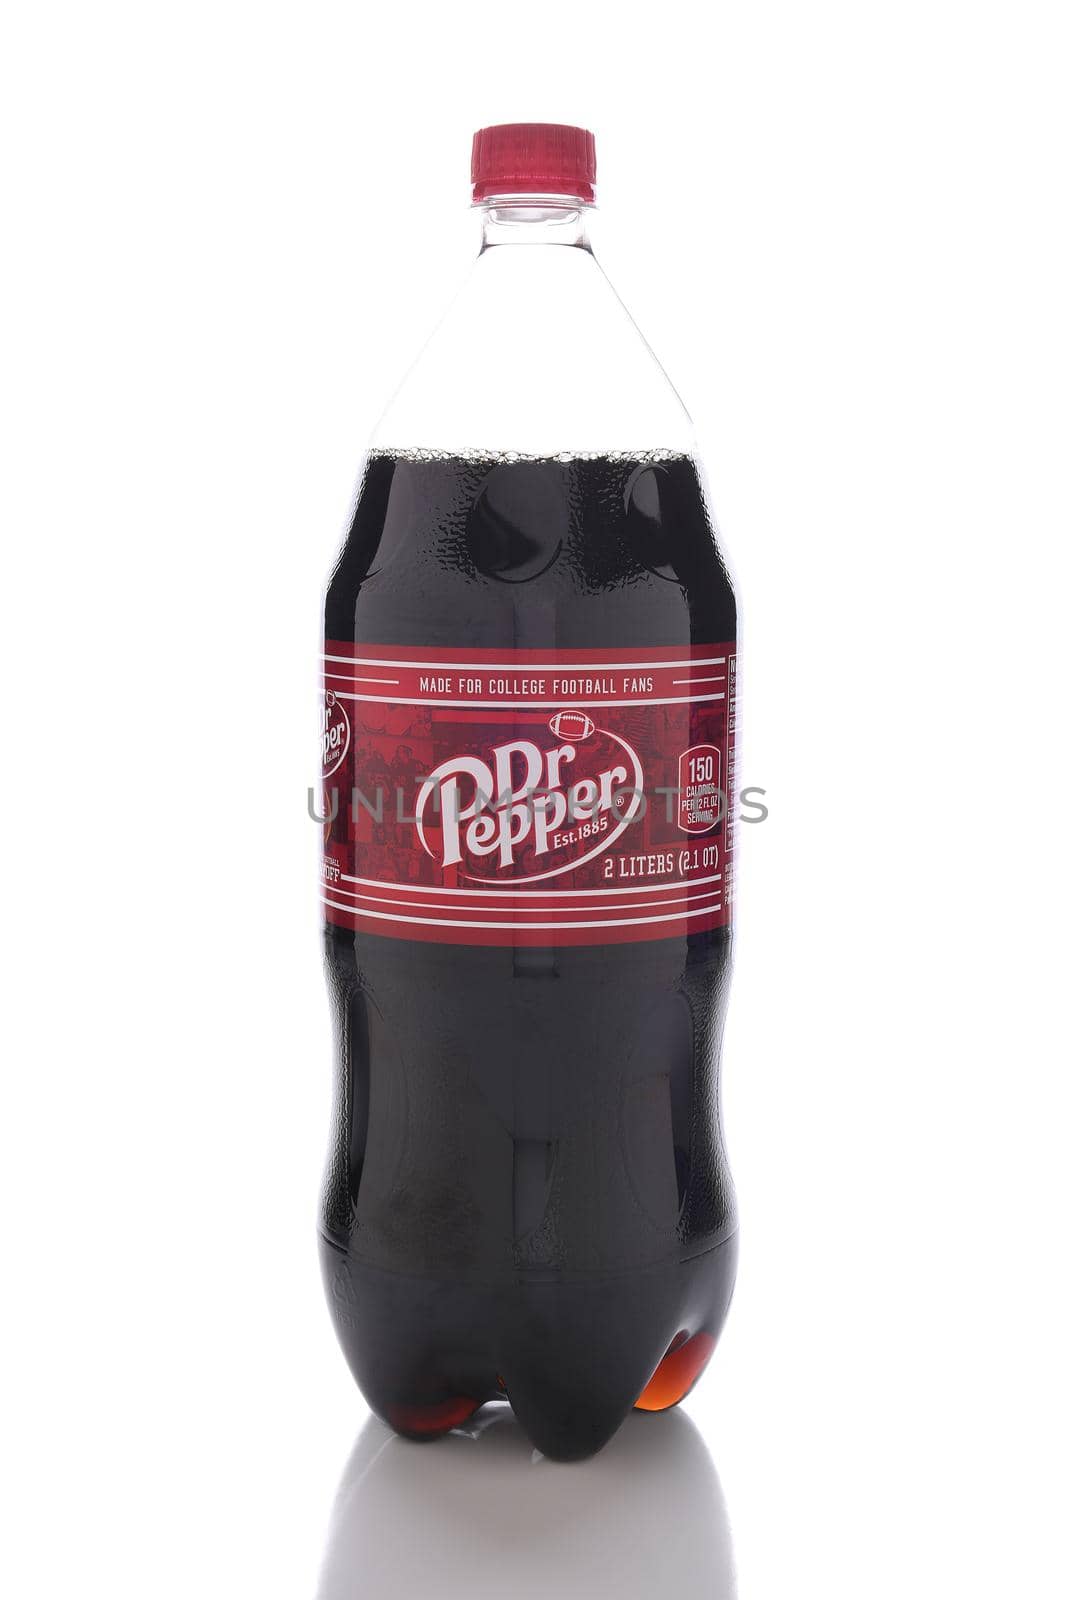 IRVINE, CALIFORNIA - JANUARY 13, 2017: Dr Pepper bottle. The drink was created by Charles Alderton in Waco, Texas, first served in 1885.